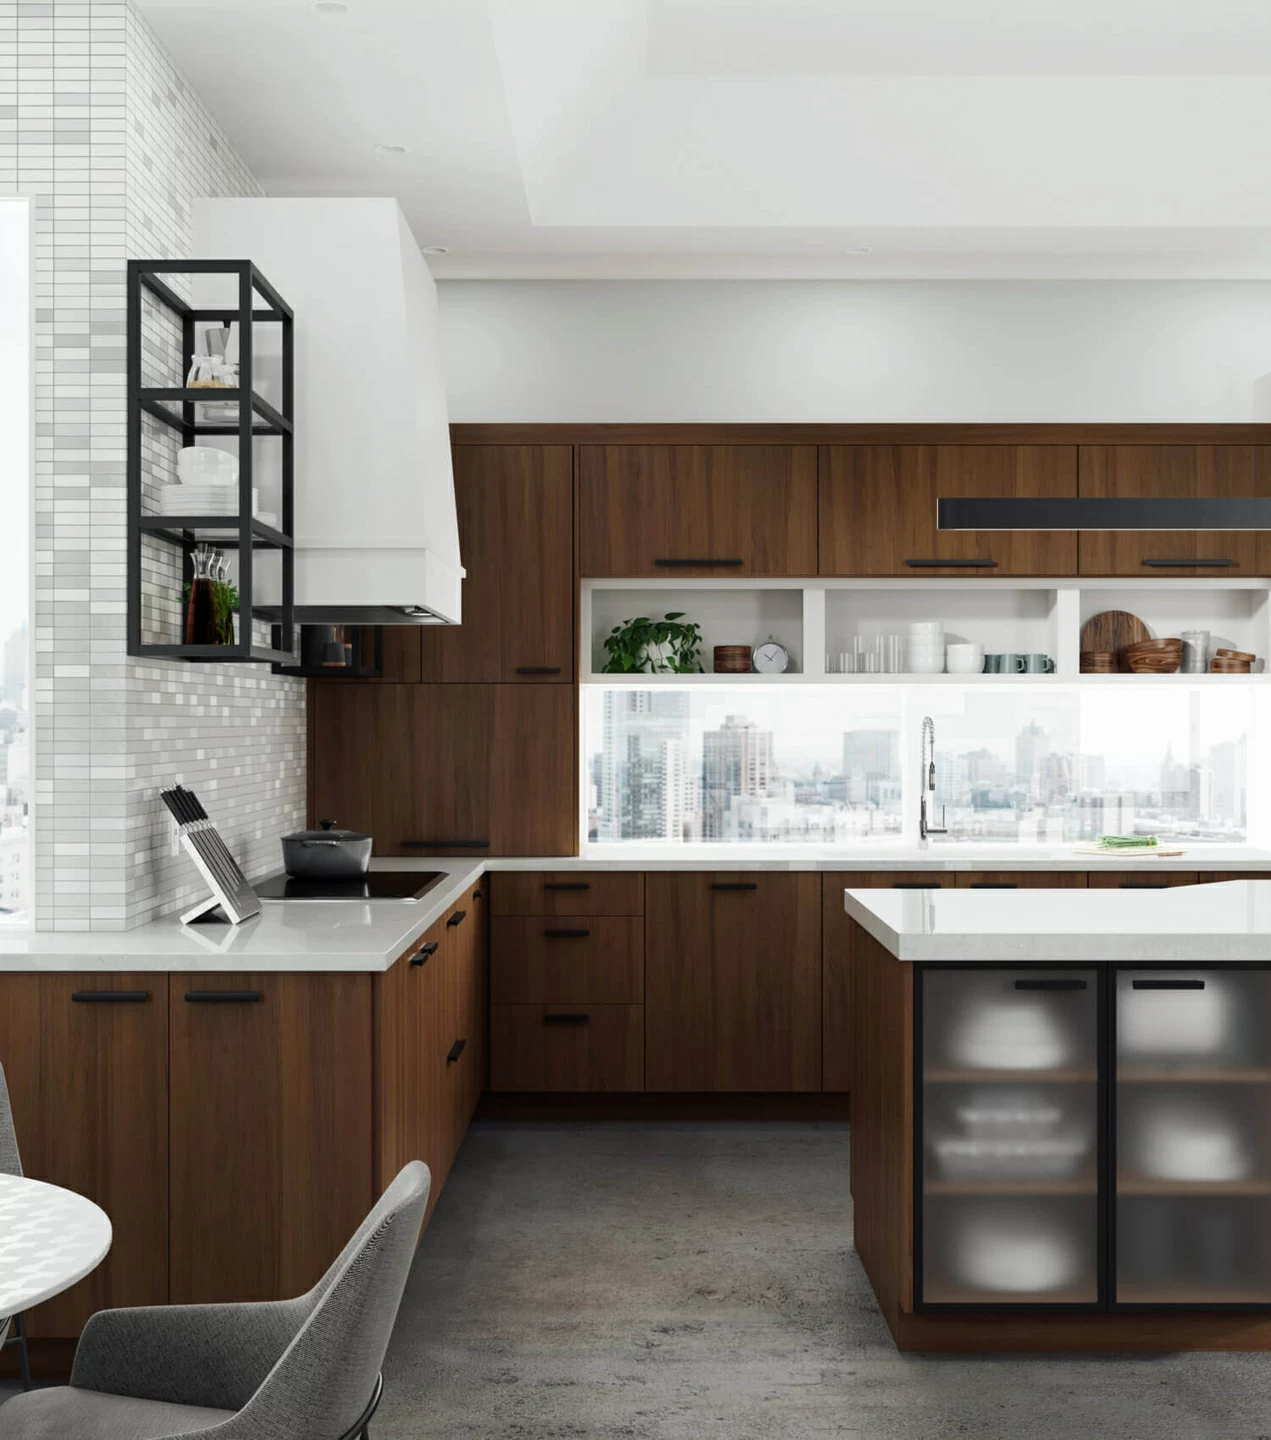 Contemporary kitchen cabinetry